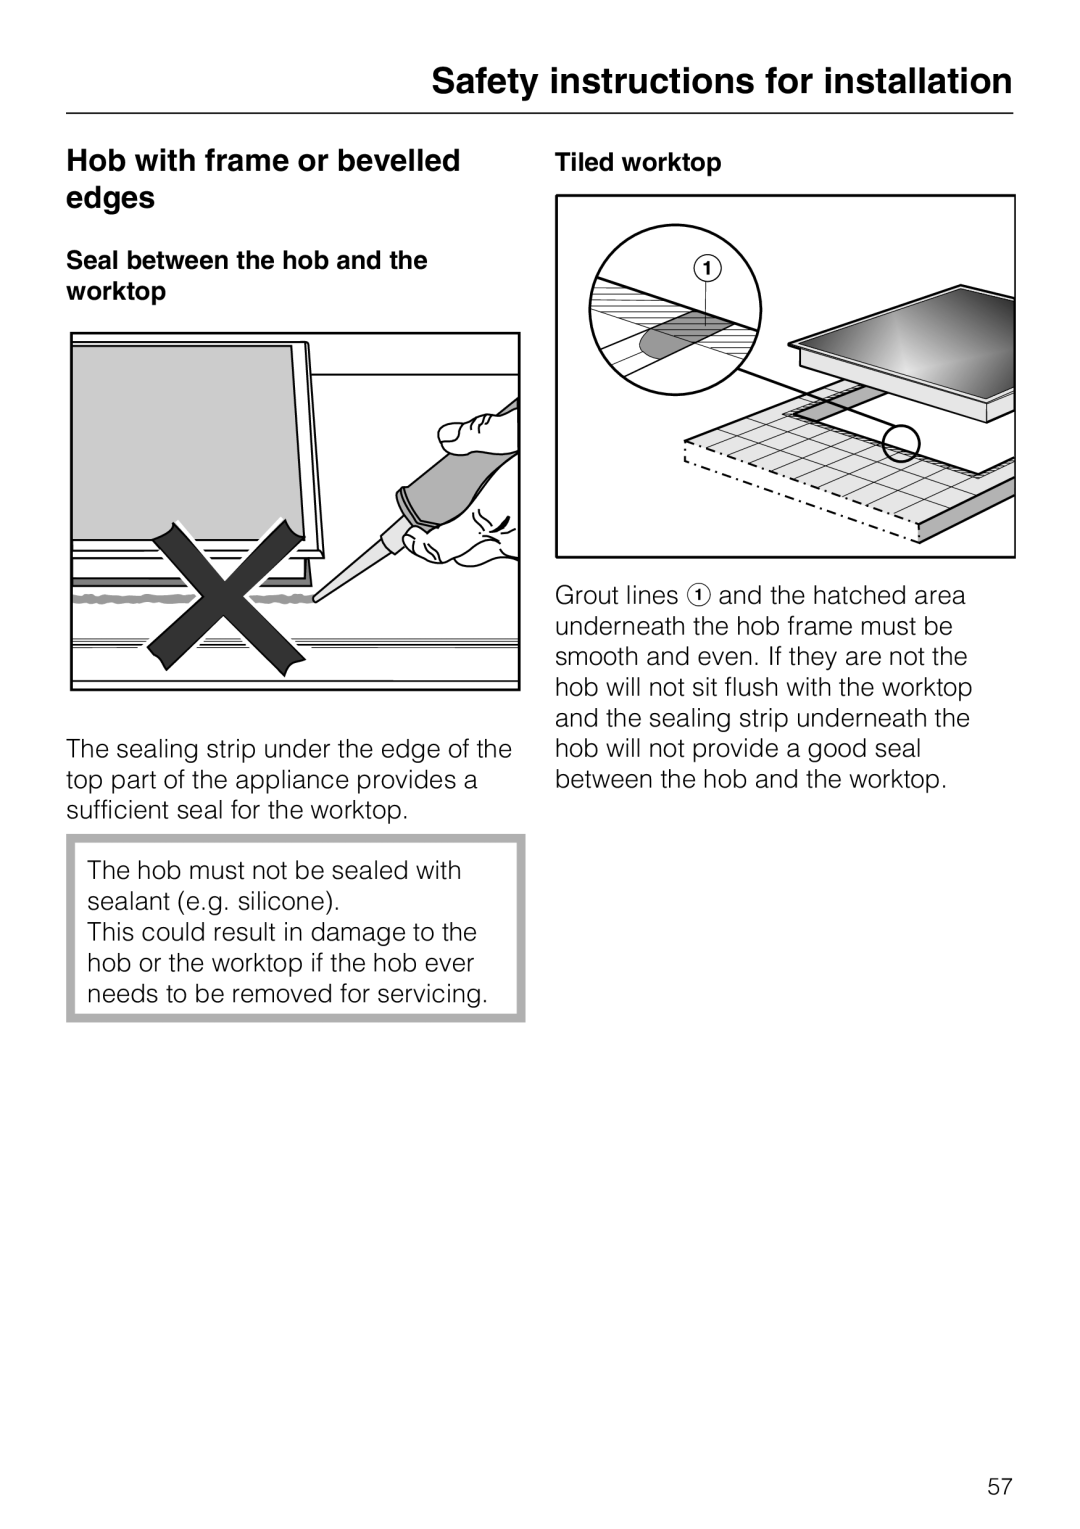 Miele KM6112 Hob with frame or bevelled edges, Safety instructions for installation, Seal between the hob and the worktop 